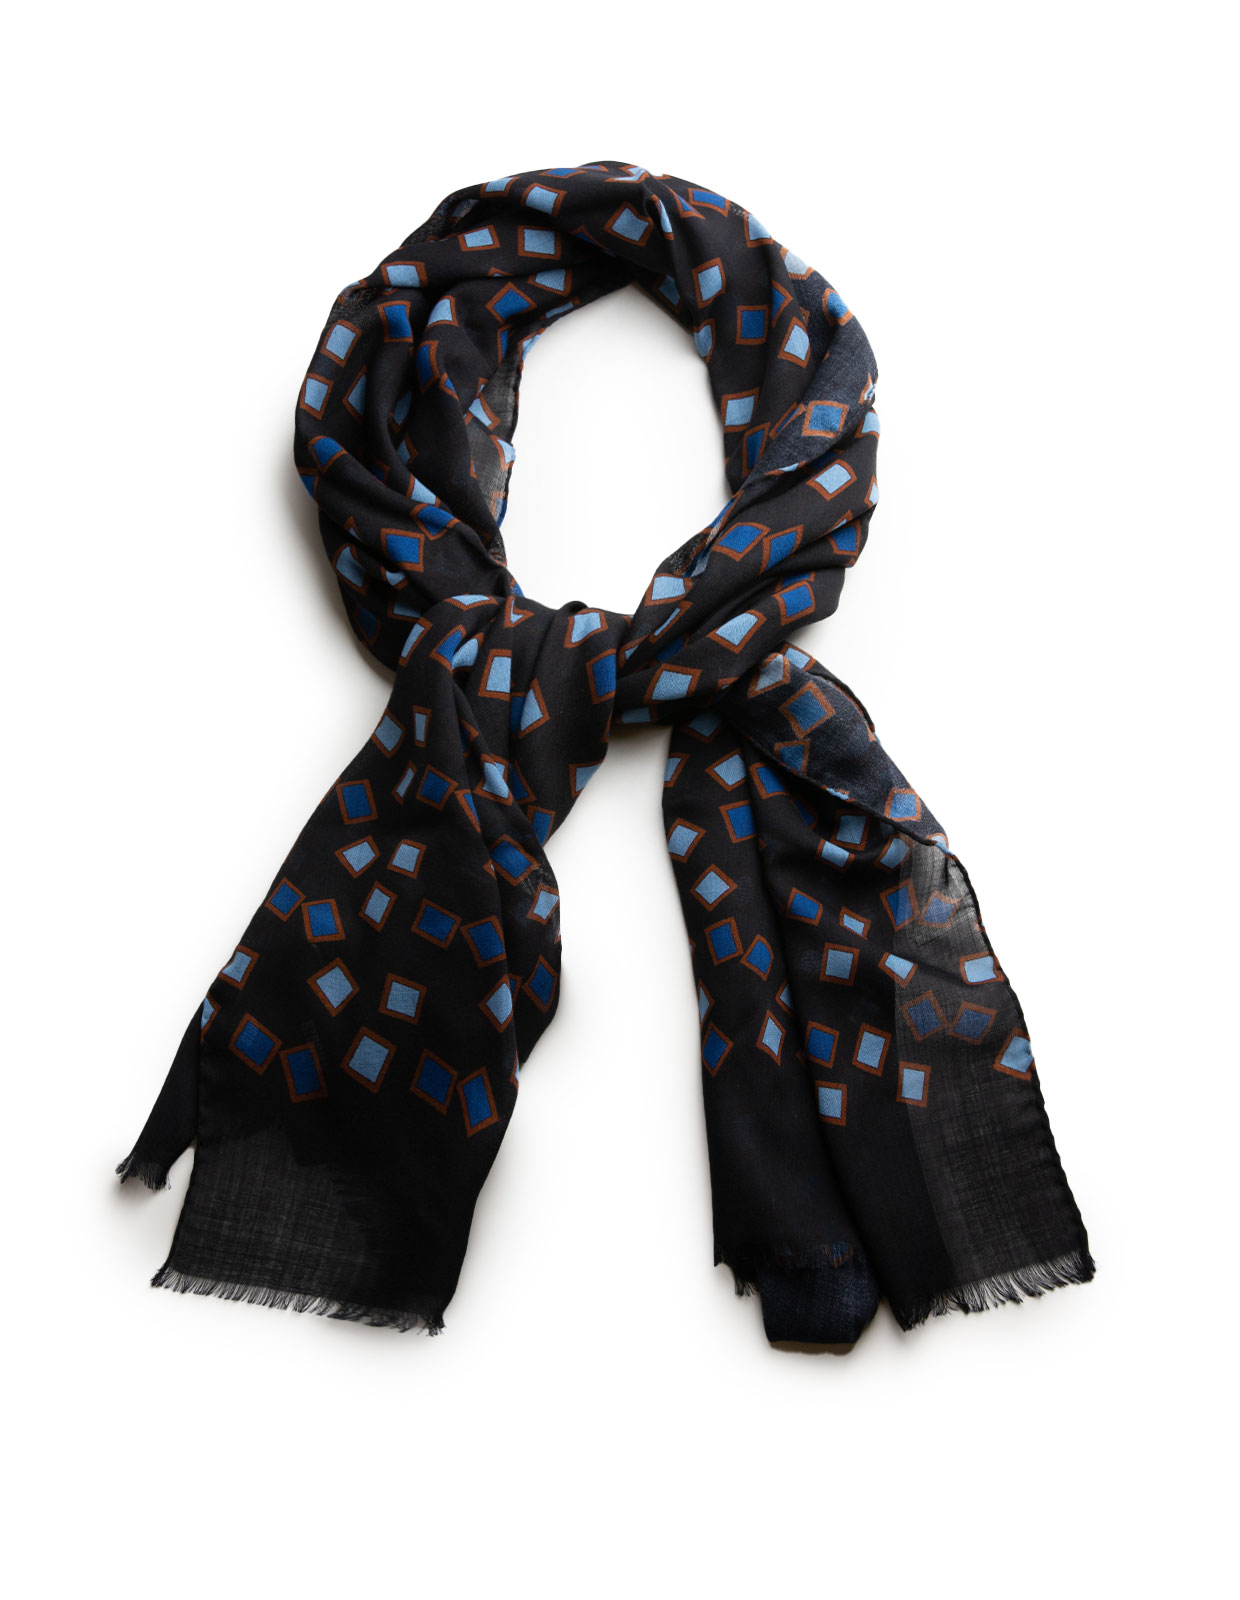 Printed Scarf Wool Cashmere Black/Blue Misc.